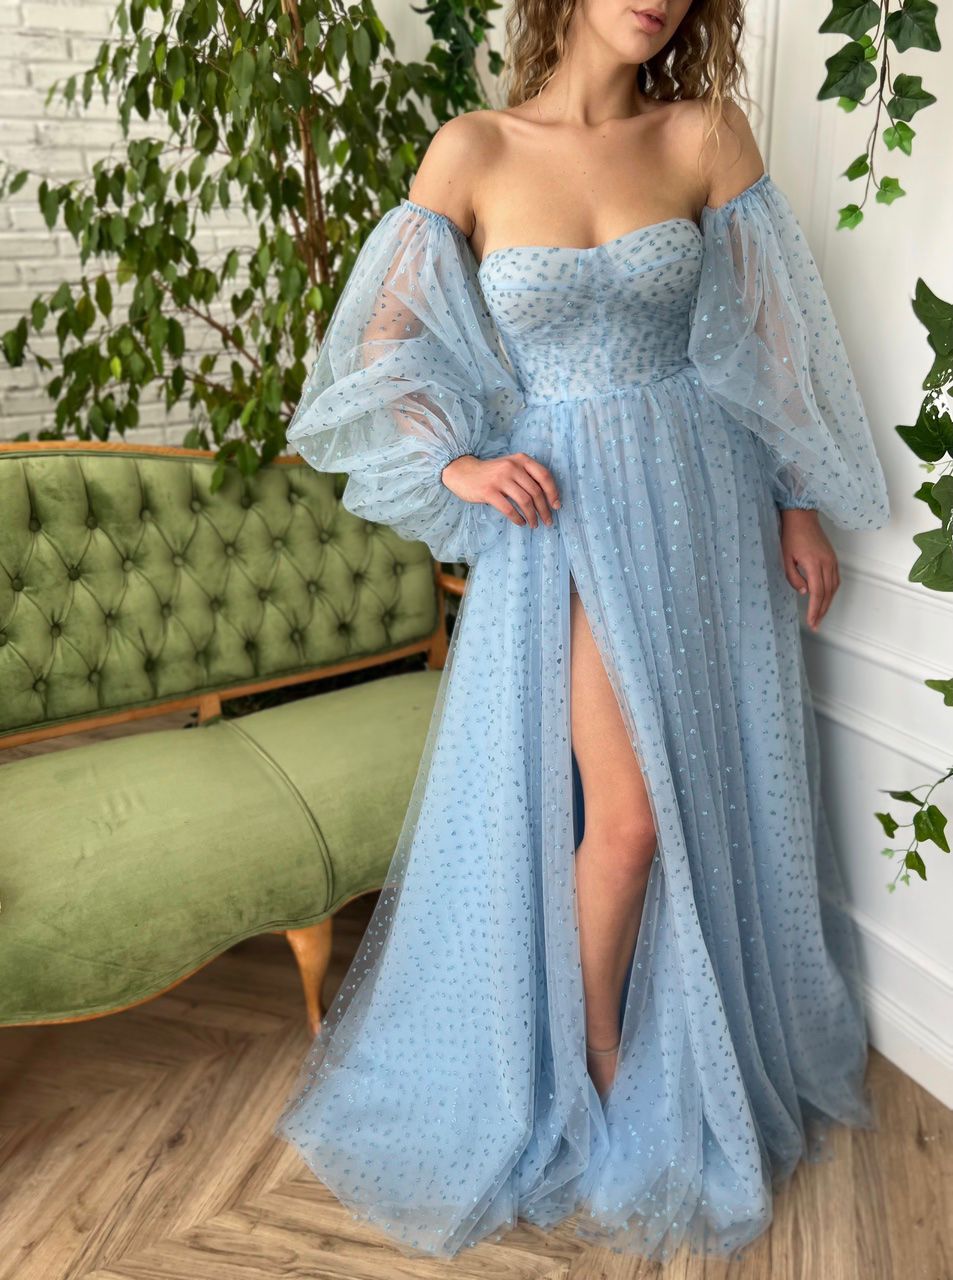 Blue A-Line dress with long off the shoulder sleeves and hearty fabric